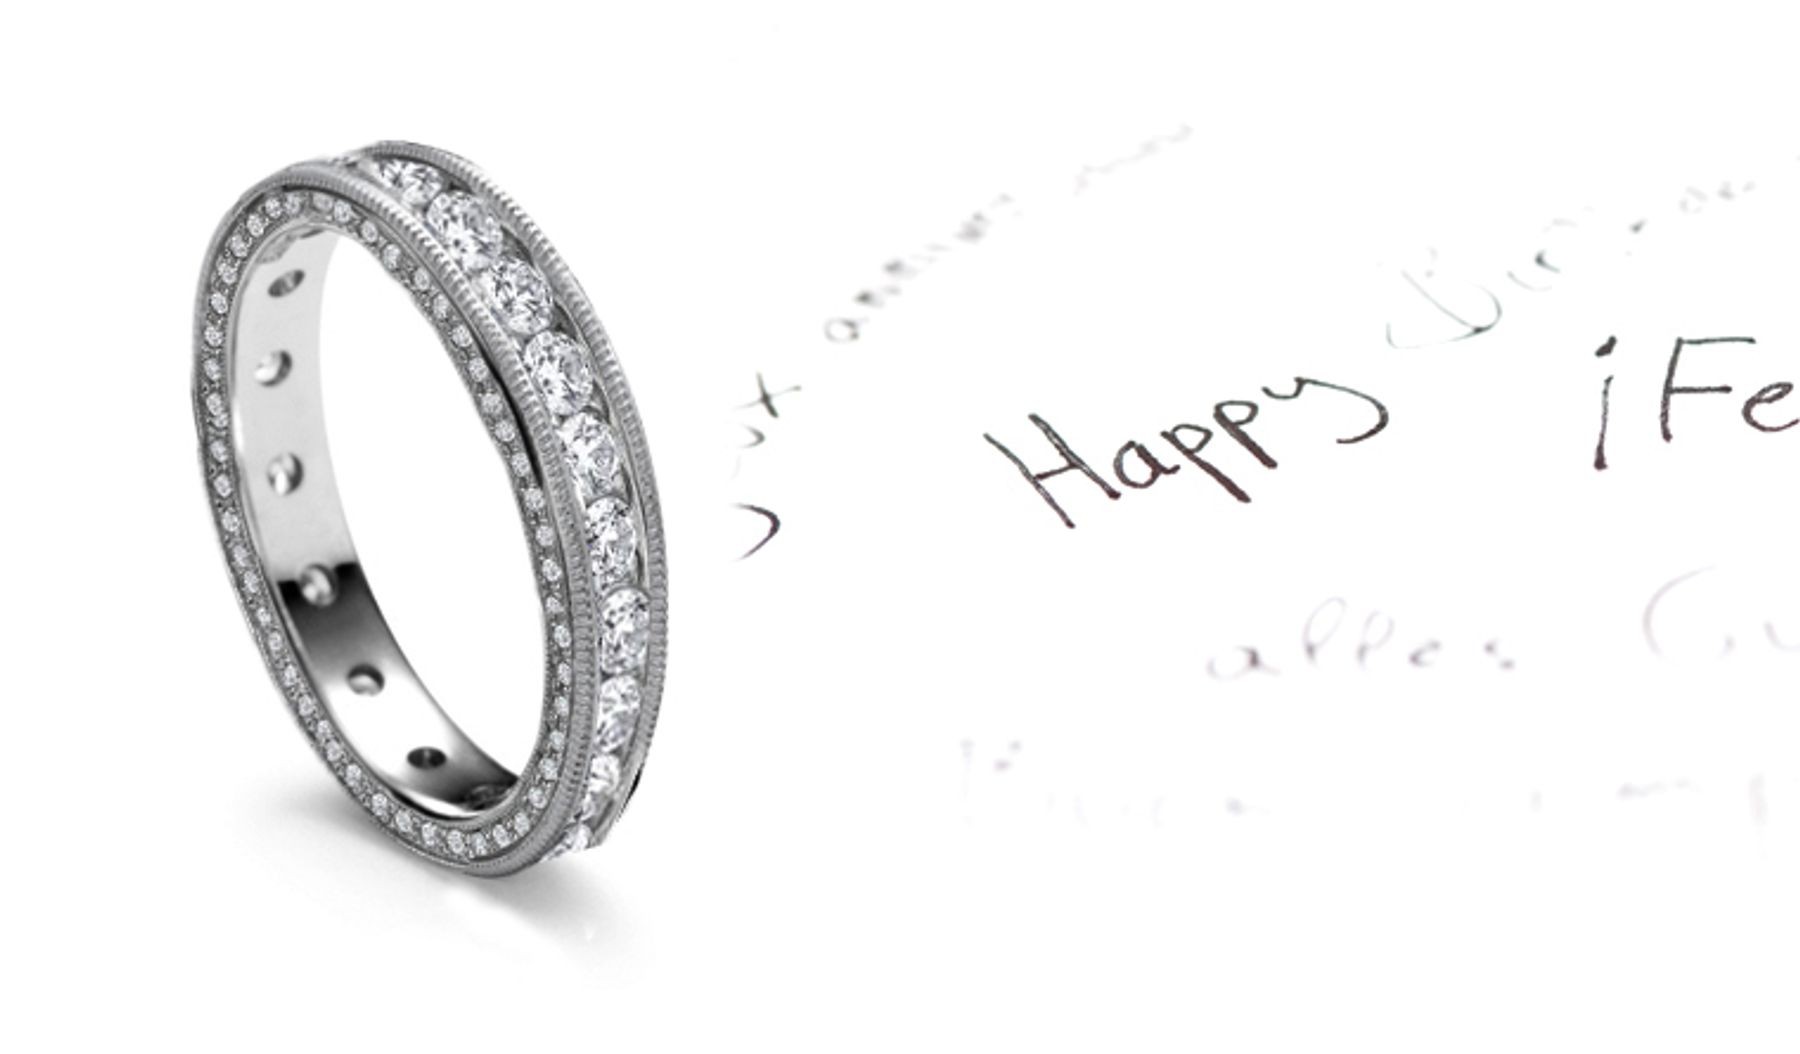 Diamond Wedding Ring Dressed With Small Diamonds Halos on Both Sides of Platinum or Gold Ring